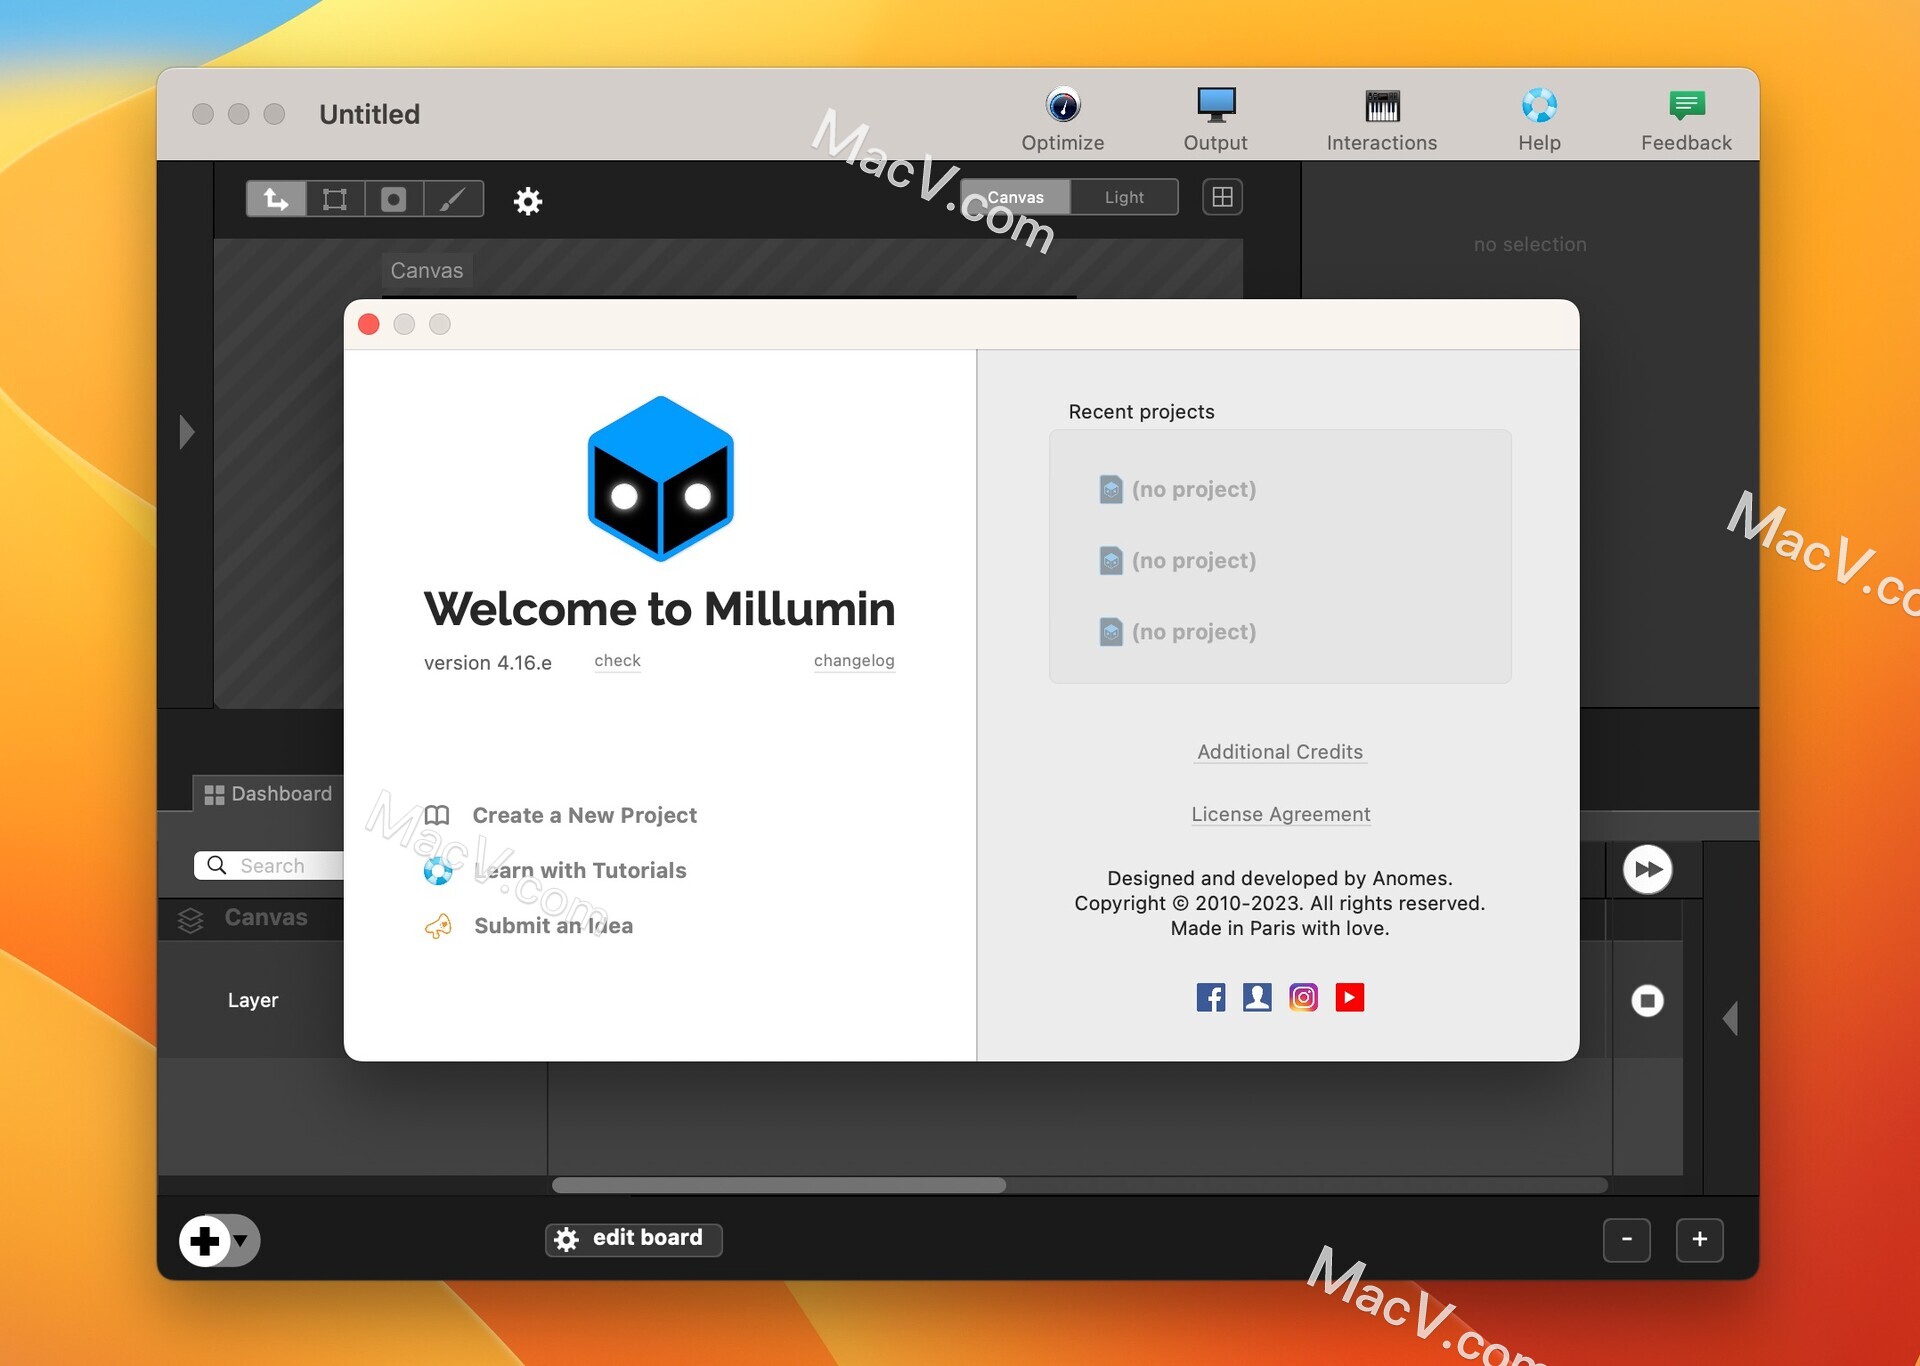 download the last version for apple Millumin 4